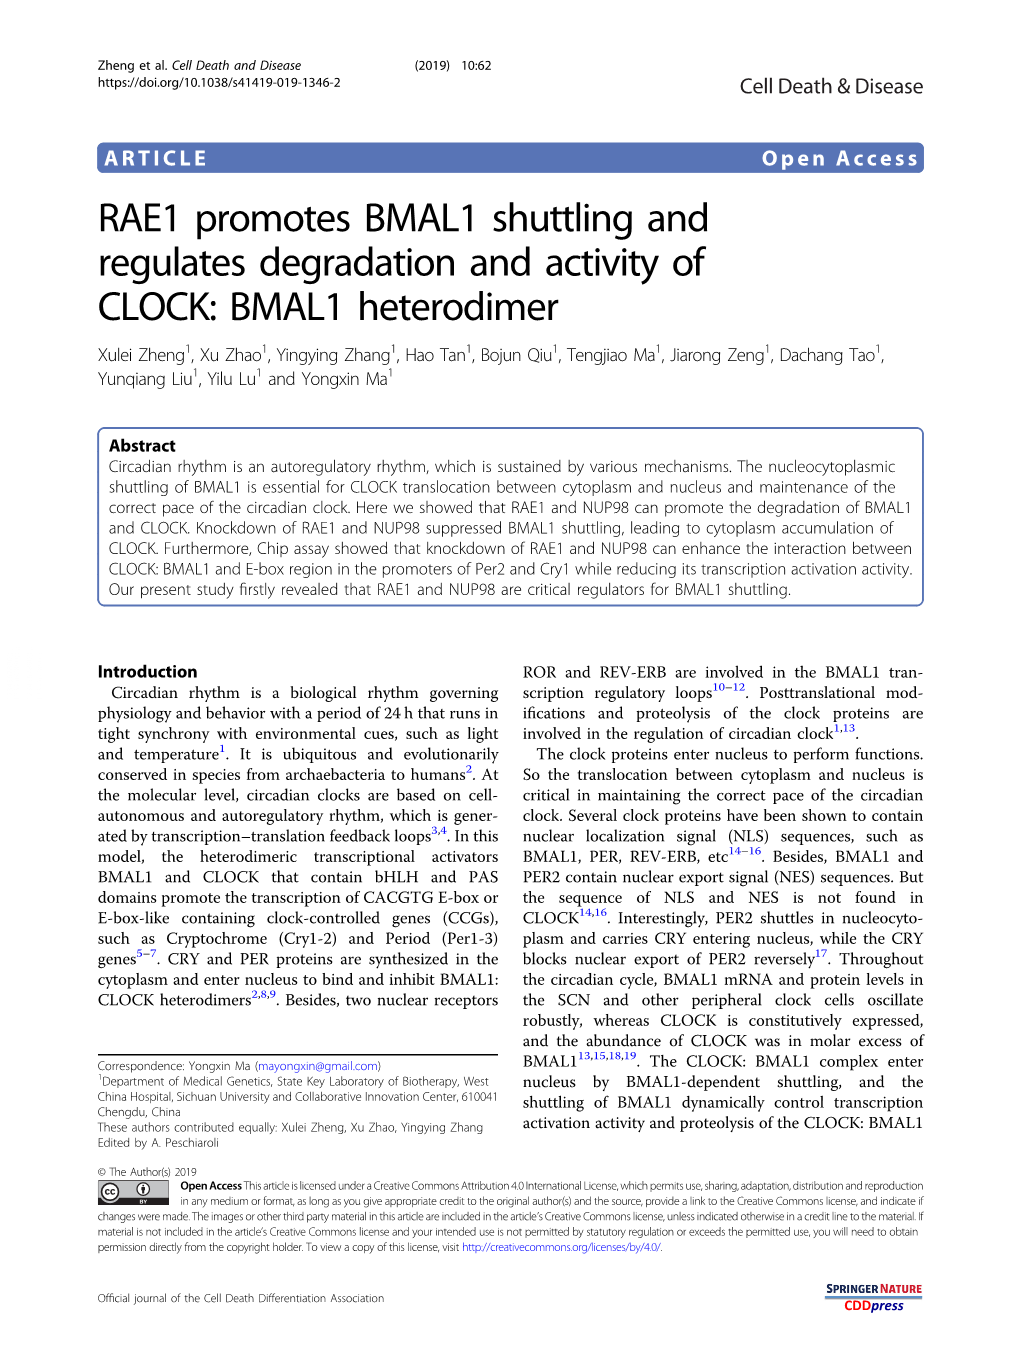 RAE1 Promotes BMAL1 Shuttling and Regulates Degradation and Activity